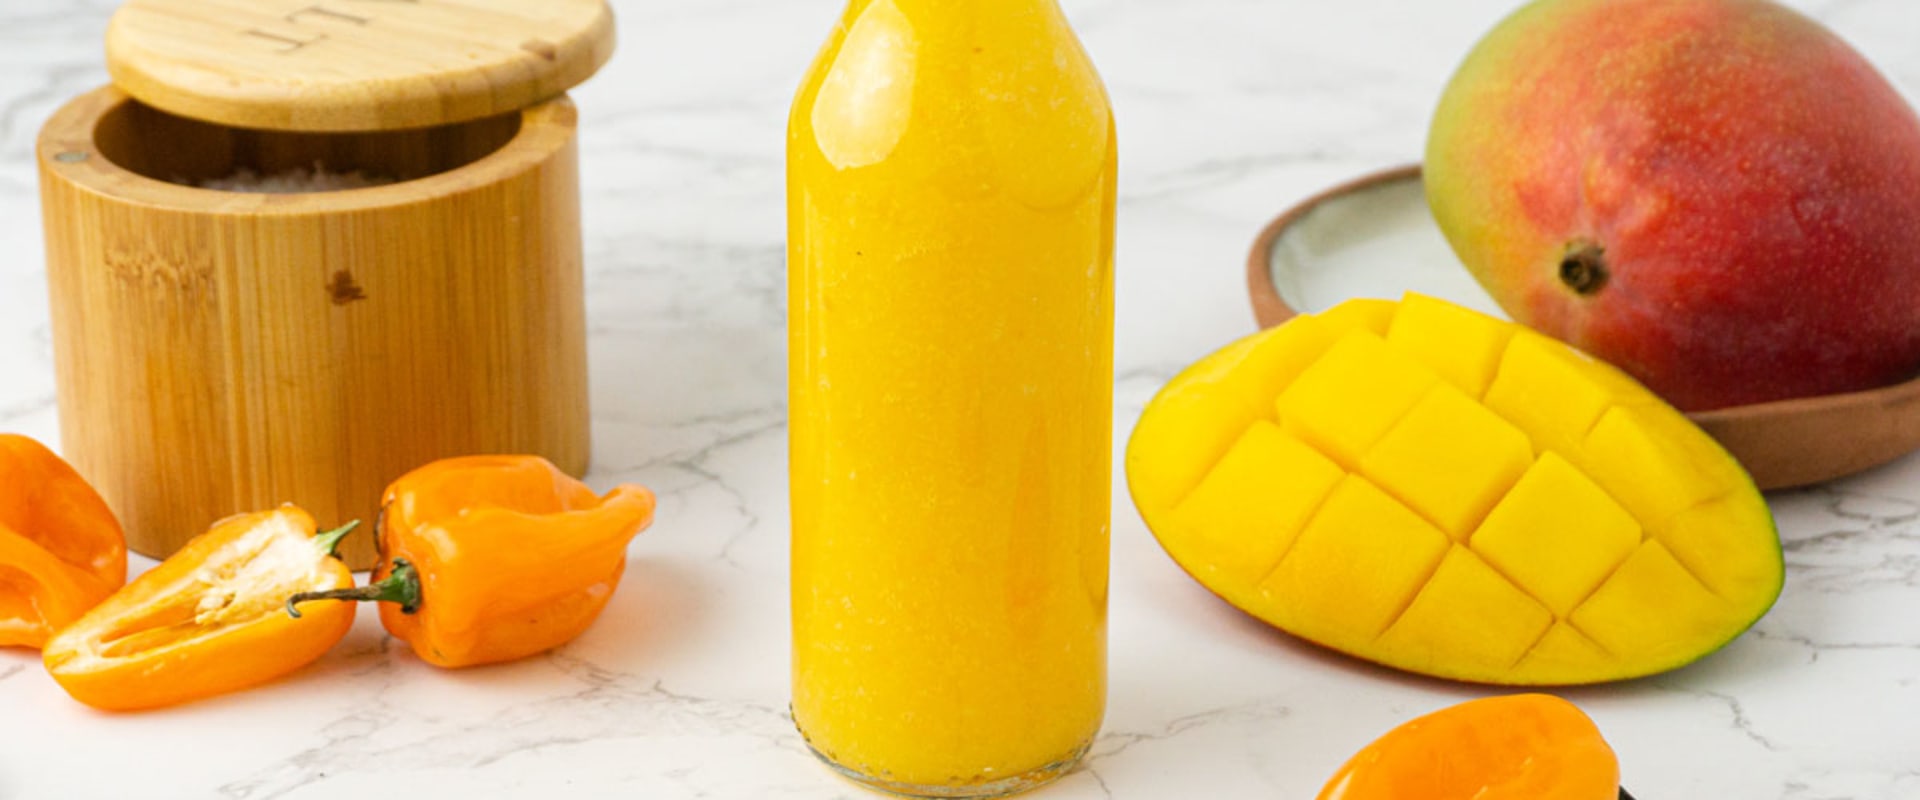 Mango Chili Sauce: A Flavourful and Versatile Sauce